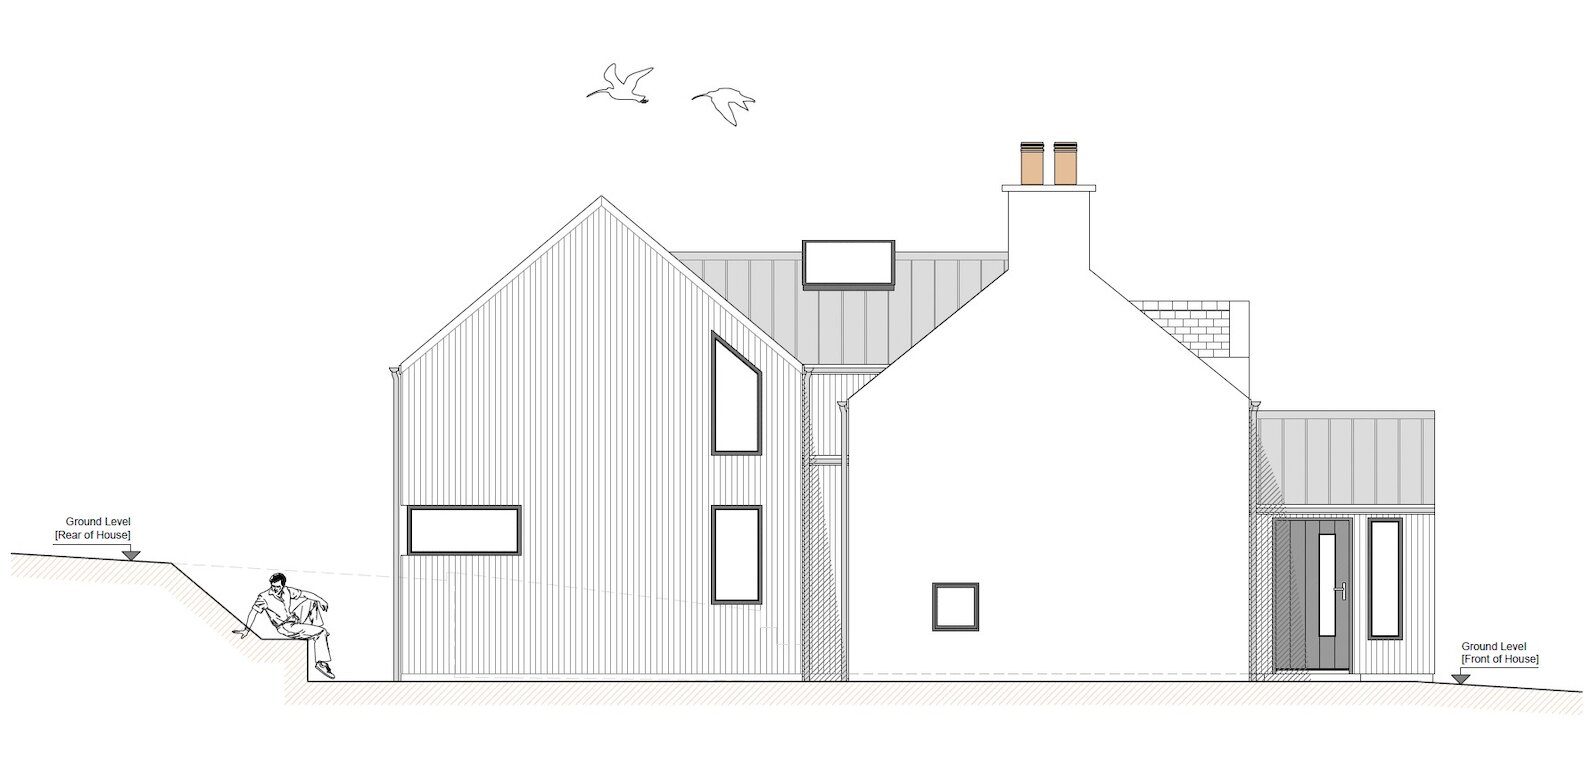 Renovation and Extension of a Residential Dwelling, Hoswick, Shetland